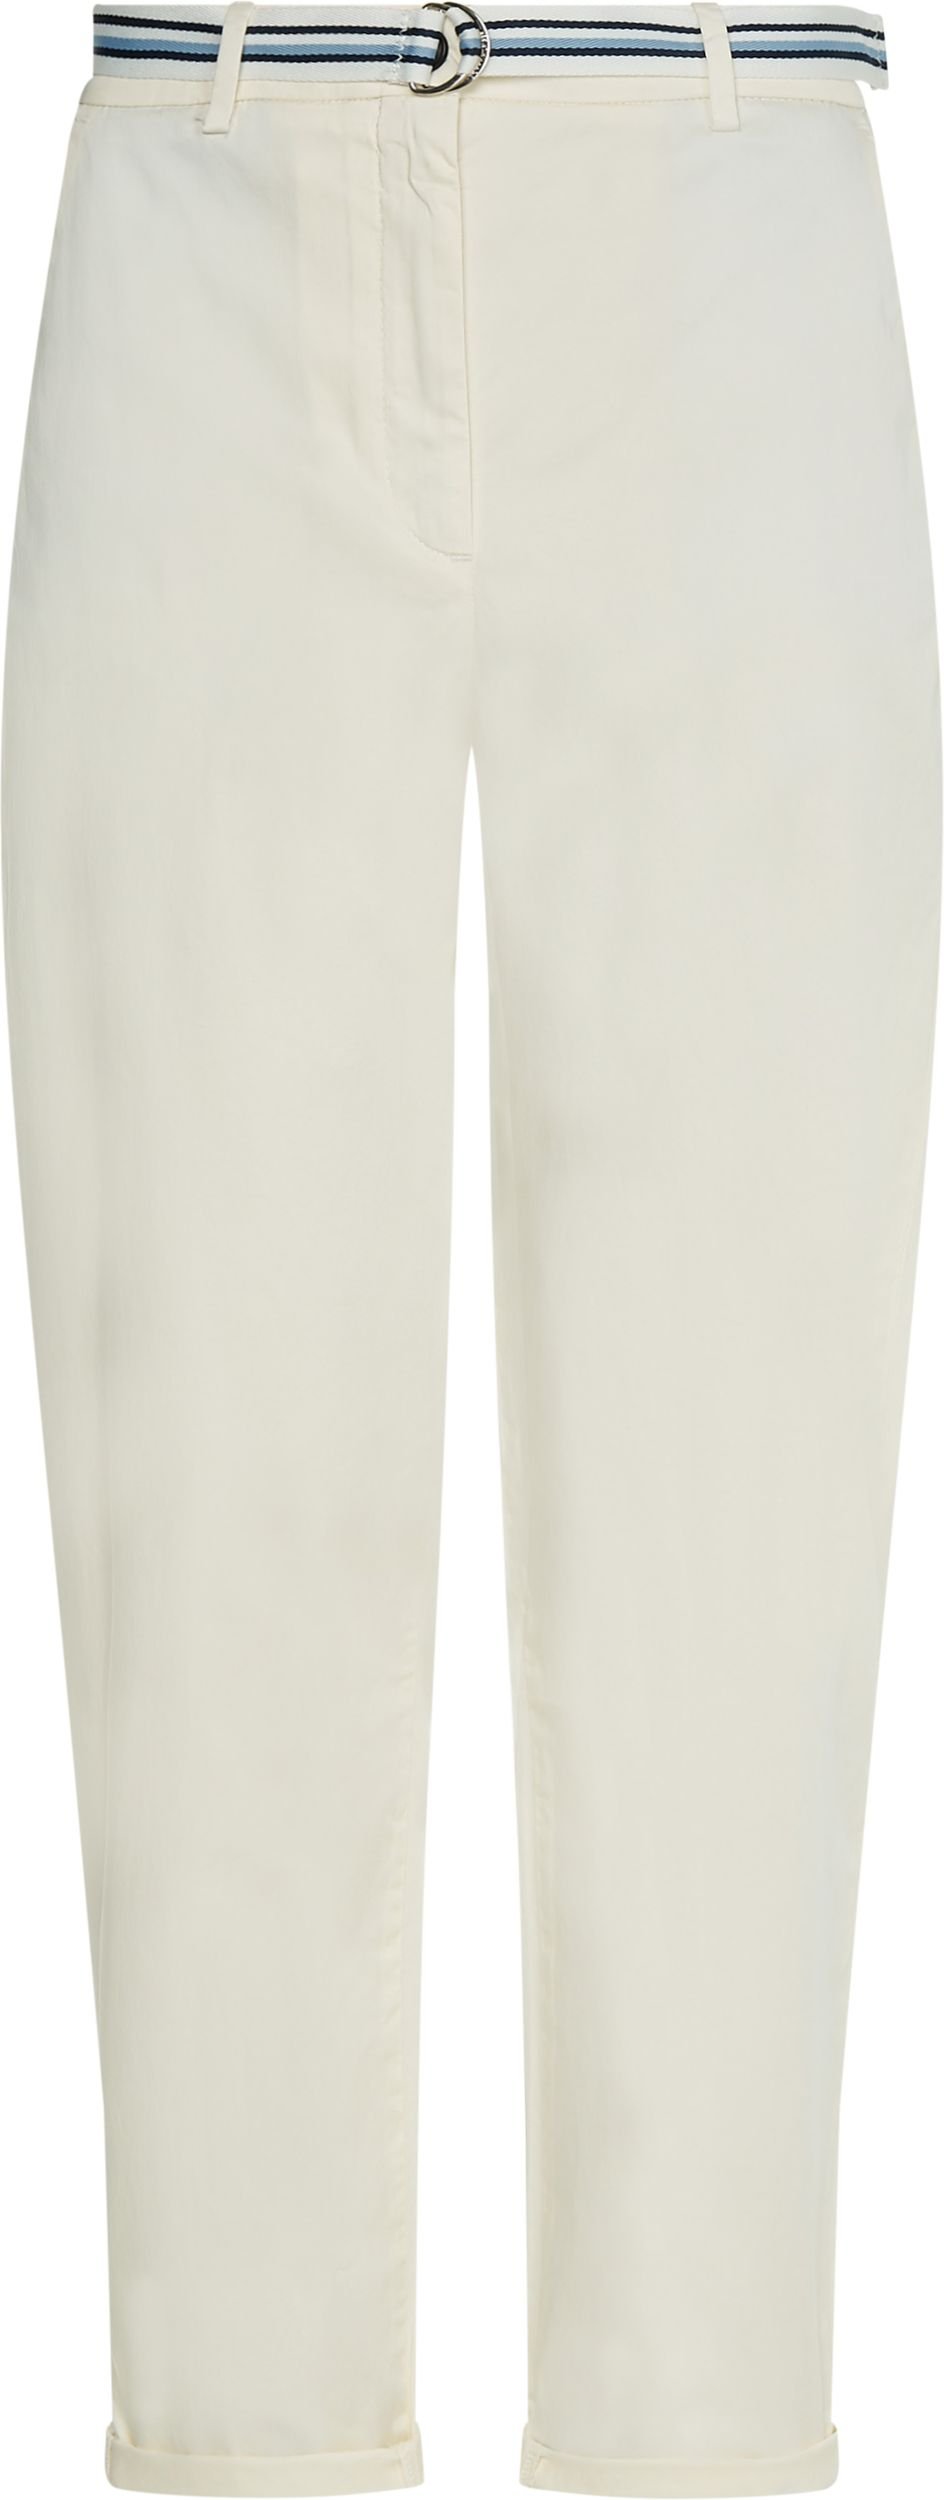 CO MODERN TAPERED CHINO PANT